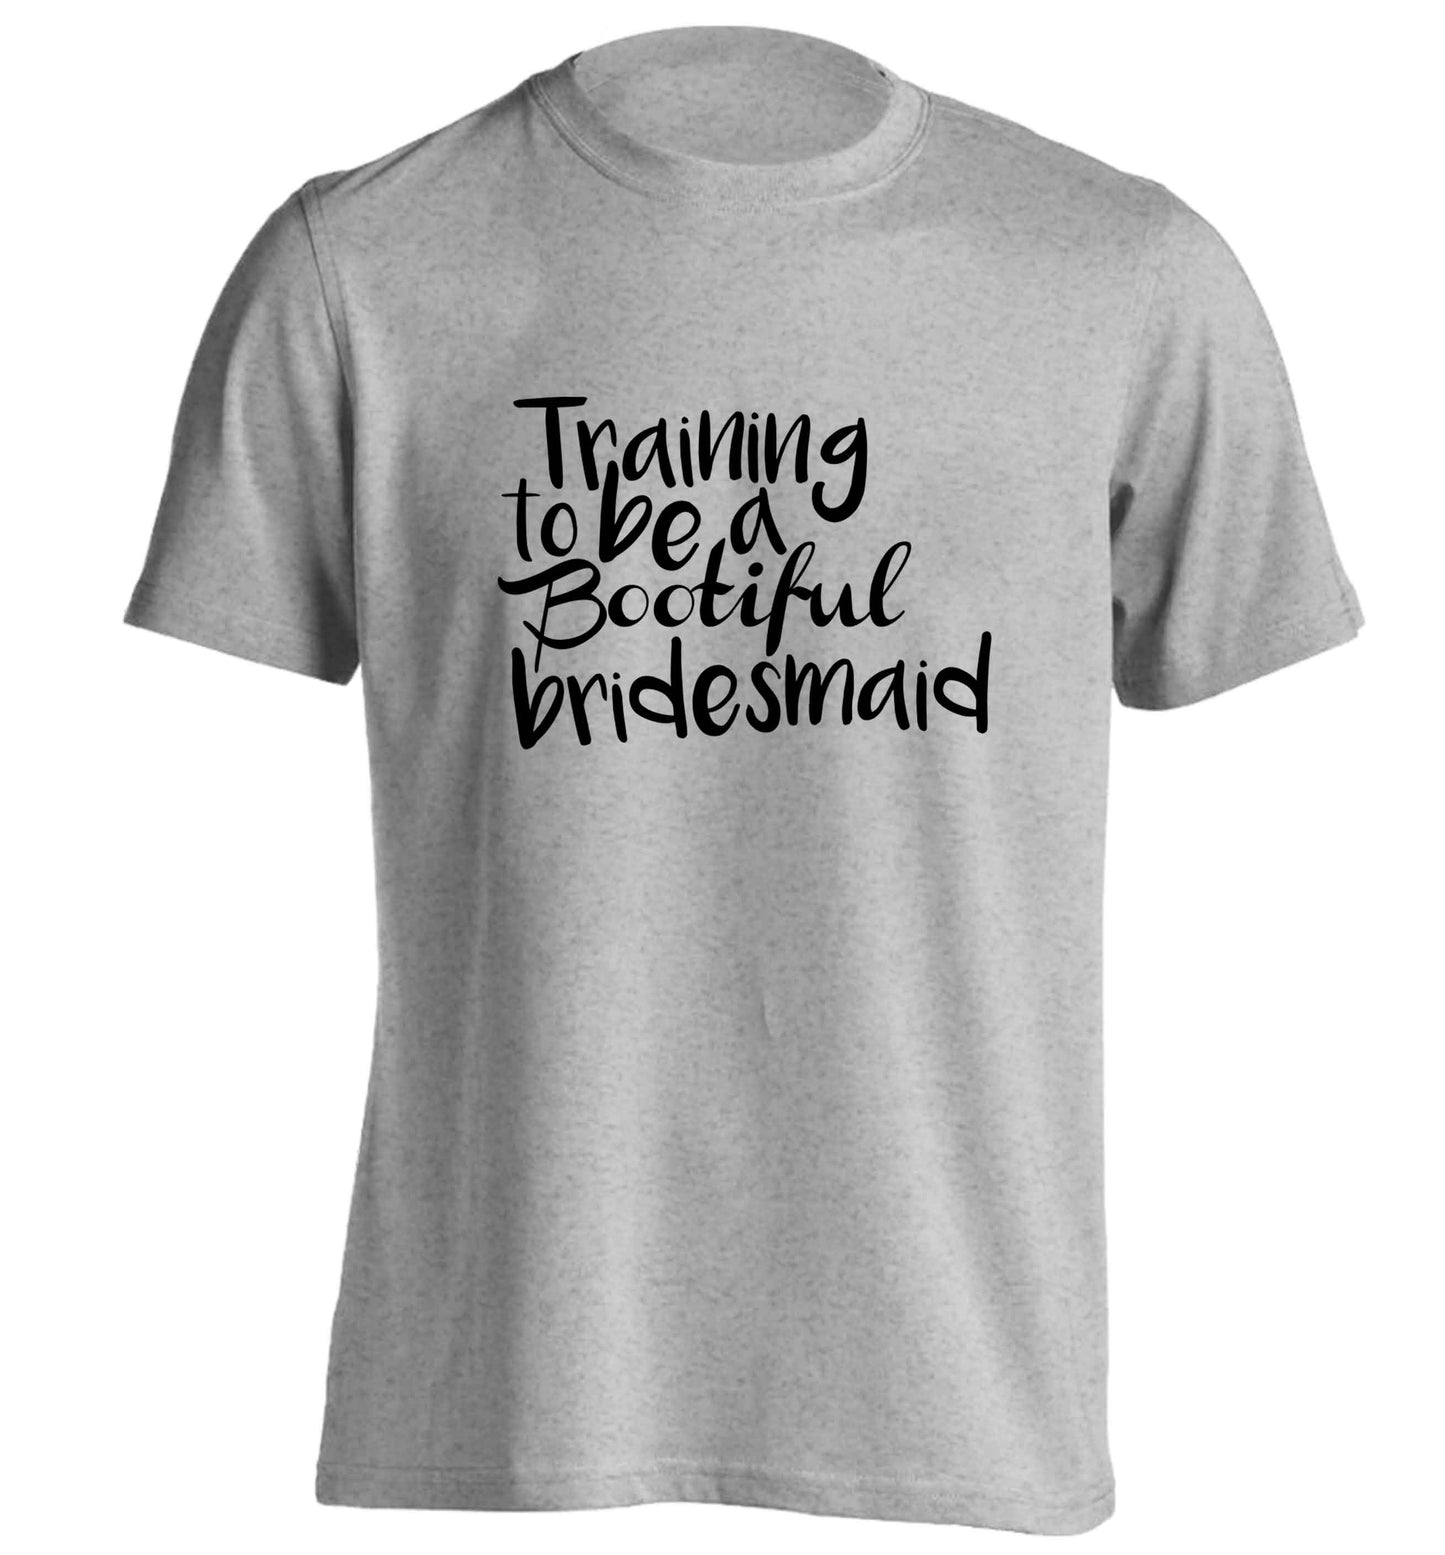 Get motivated and get fit for your big day! Our workout quotes and designs will get you ready to sweat! Perfect for any bride, groom or bridesmaid to be!  adults unisex grey Tshirt 2XL